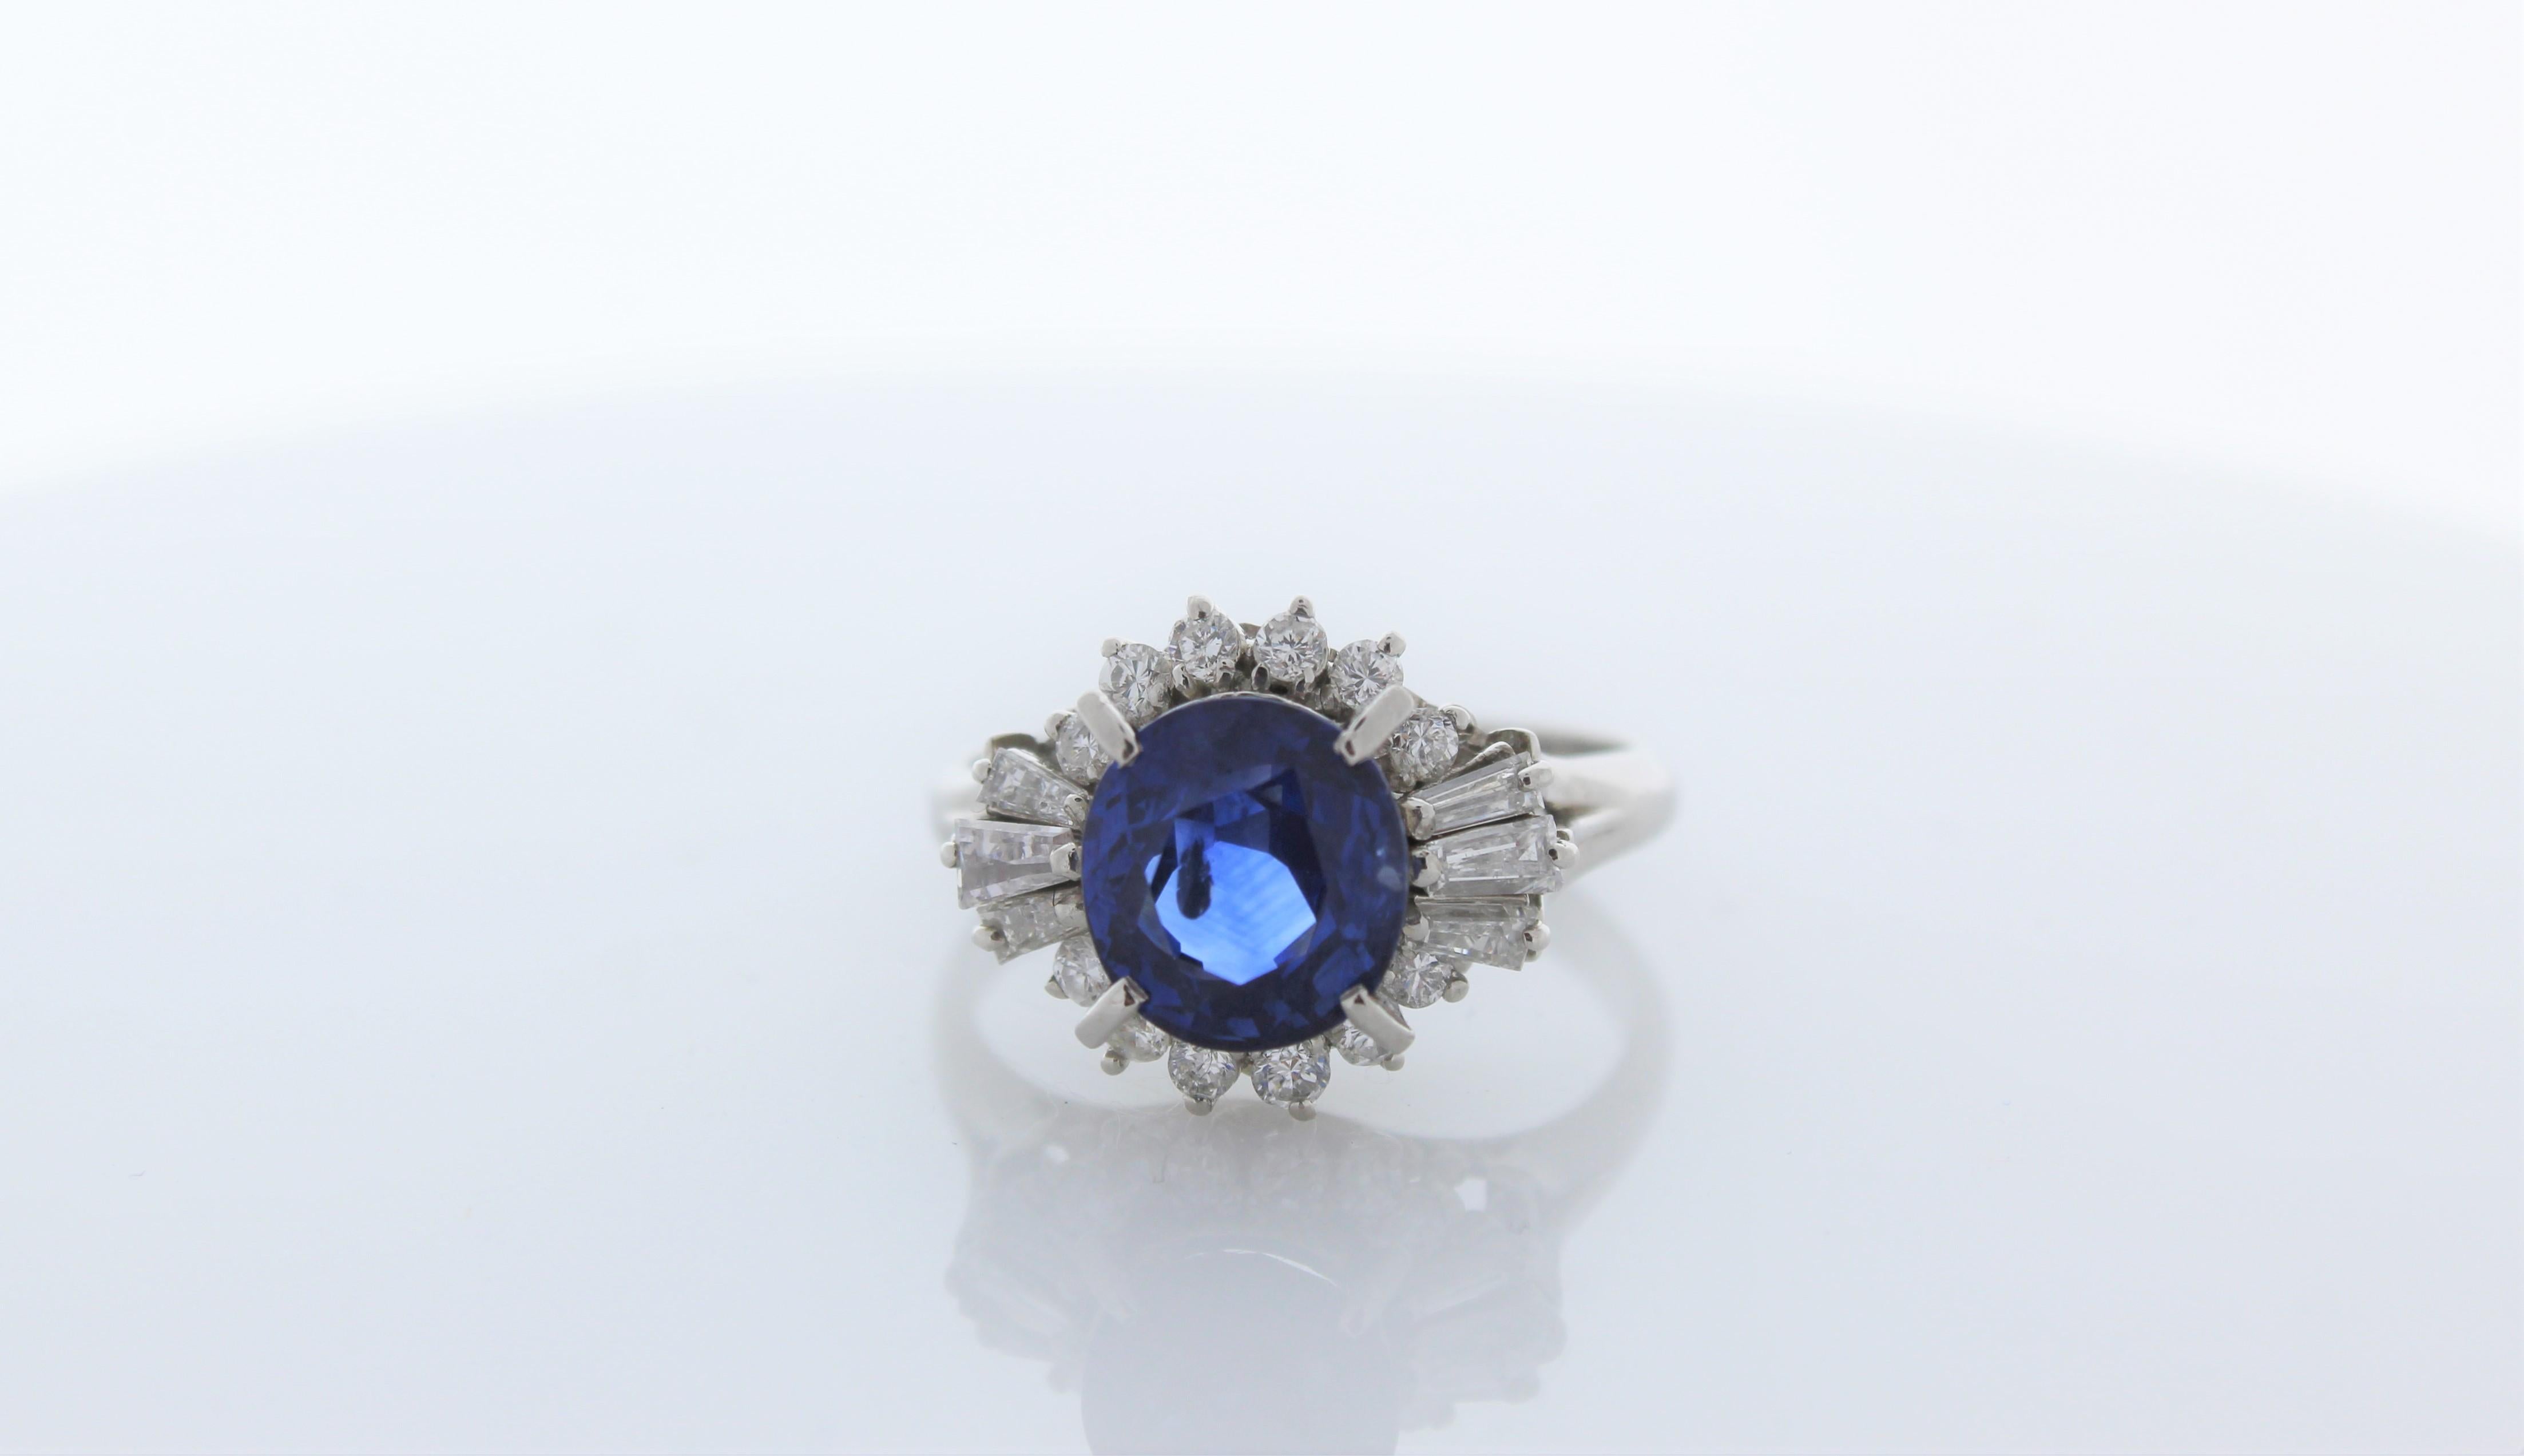 This is a 2.72 carat cushion cut blue sapphire. The gem source is Sri Lanka; its color is royal blue and it is evenly distributed throughout the gem. Its luster and transparency is superb. Sparkling round brilliant cut diamonds frame this sapphire